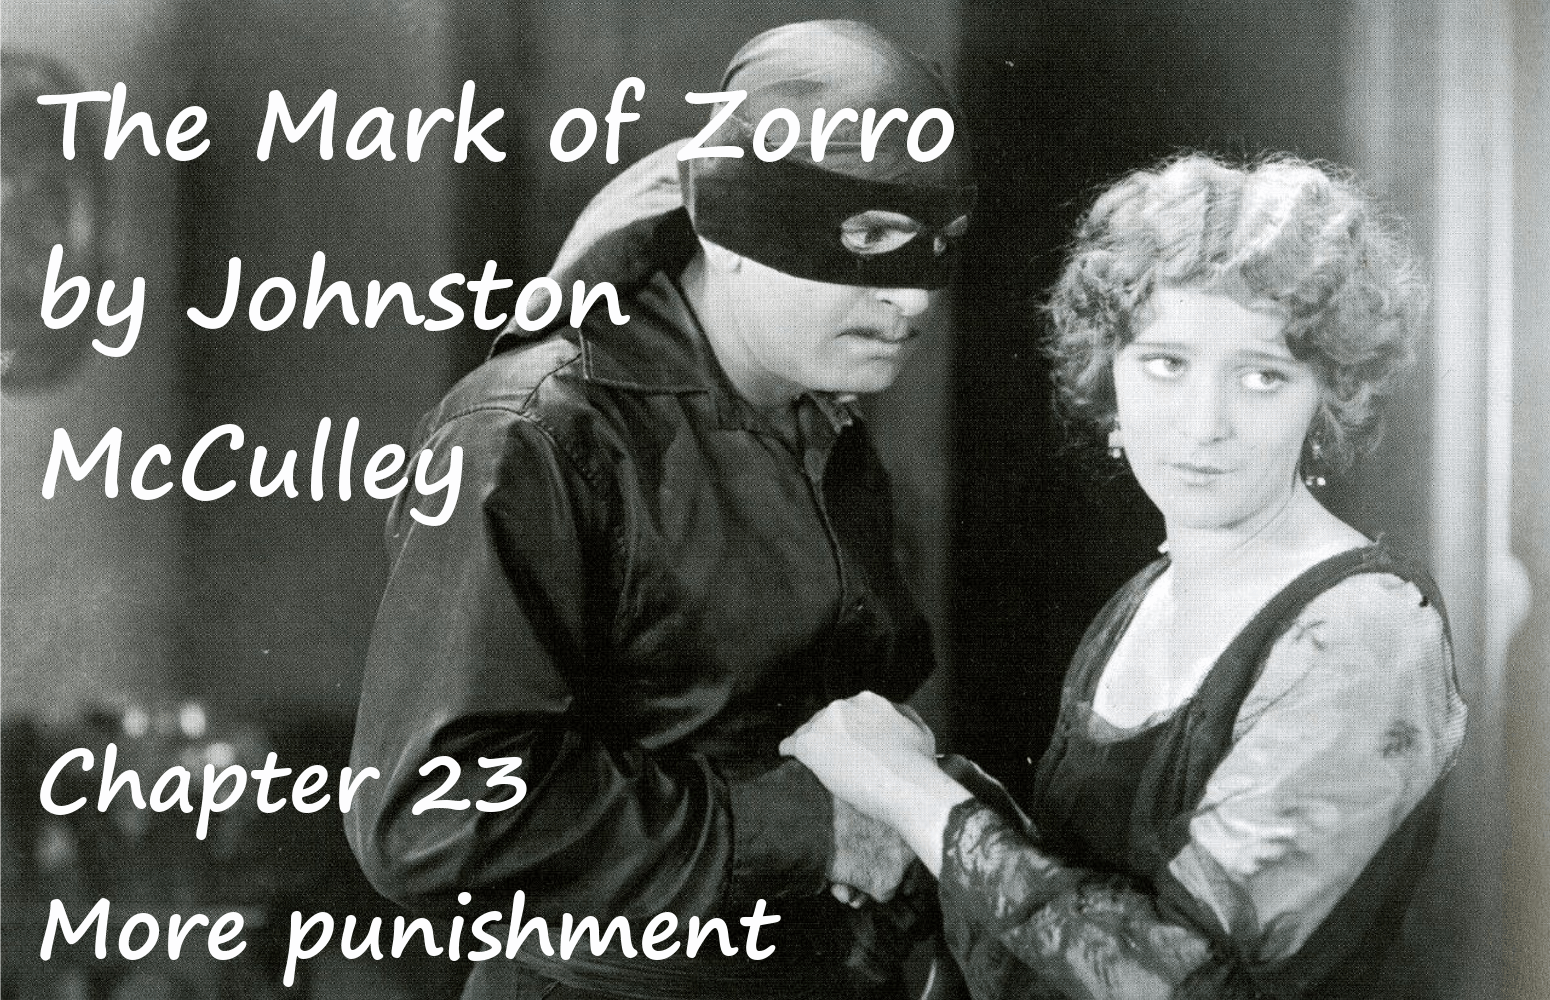 The Mark of Zorro chapter 23 More punishment by Johnston McCulley